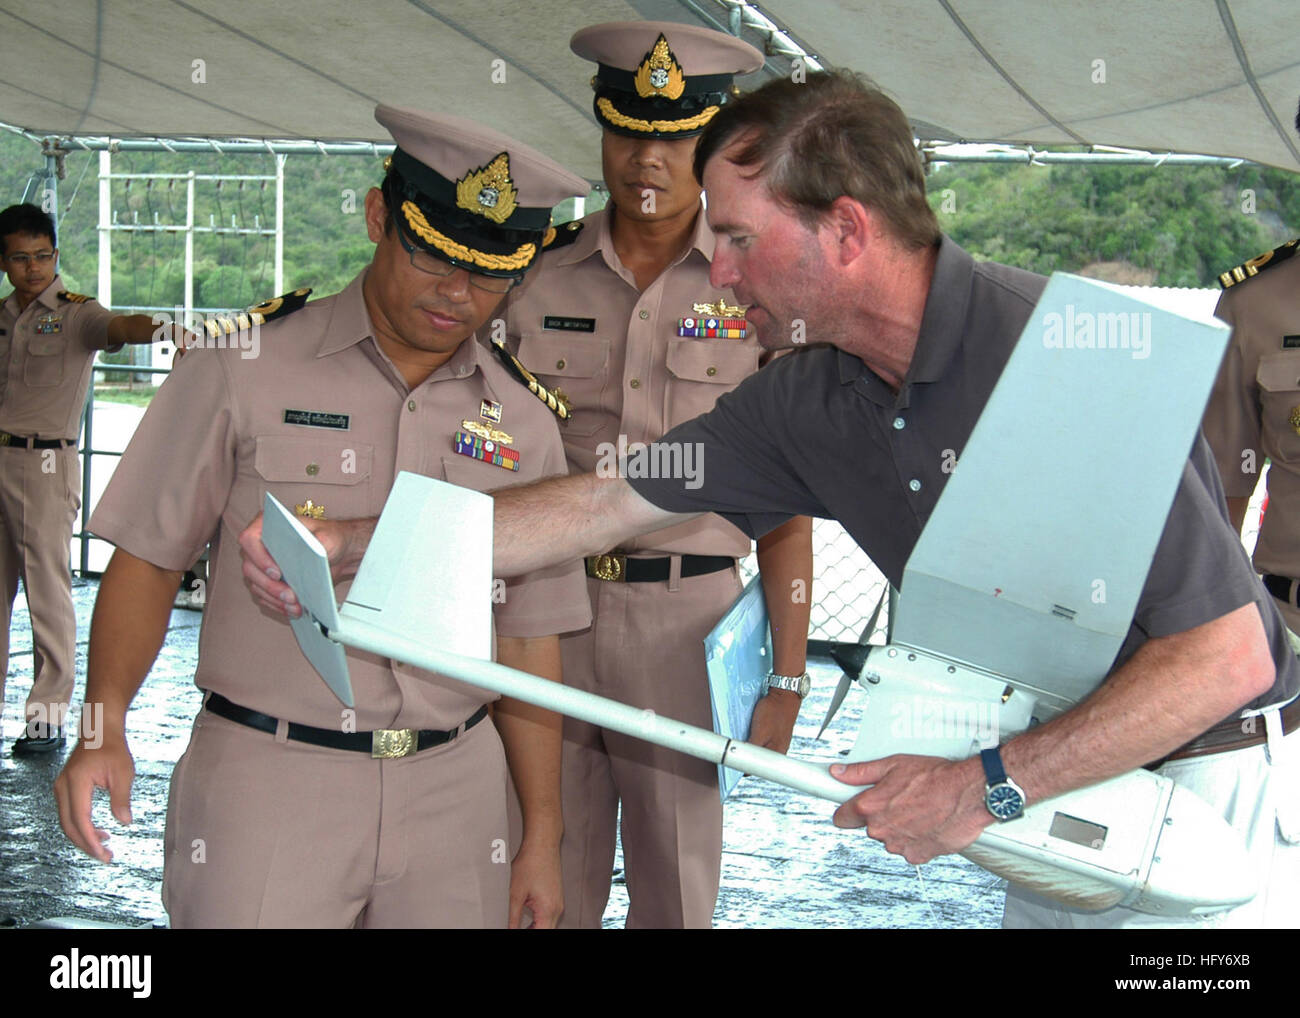 100516-N-3446M-024 SAMAESAN CAMP, Thailand (May 16, 2010) Paul Trist Jr., right, a civilian flight demonstration manager, shows Royal Thai Navy officers how to install the tail rudder on the Puma AE mini-unmanned aerial vehicle (UAV) during a demonstration of the vehicleÕs capabilities as part of Cooperation Afloat Readiness and Training (CARAT) Thailand 2010. CARAT is a series of bilateral exercises held annually in Southeast Asia to strengthen relationship and enhance force readiness. (U.S. Navy photo by Mass Communication Specialist 1st Class Kim McLendon/Released) US Navy 100516-N-3446M-02 Stock Photo